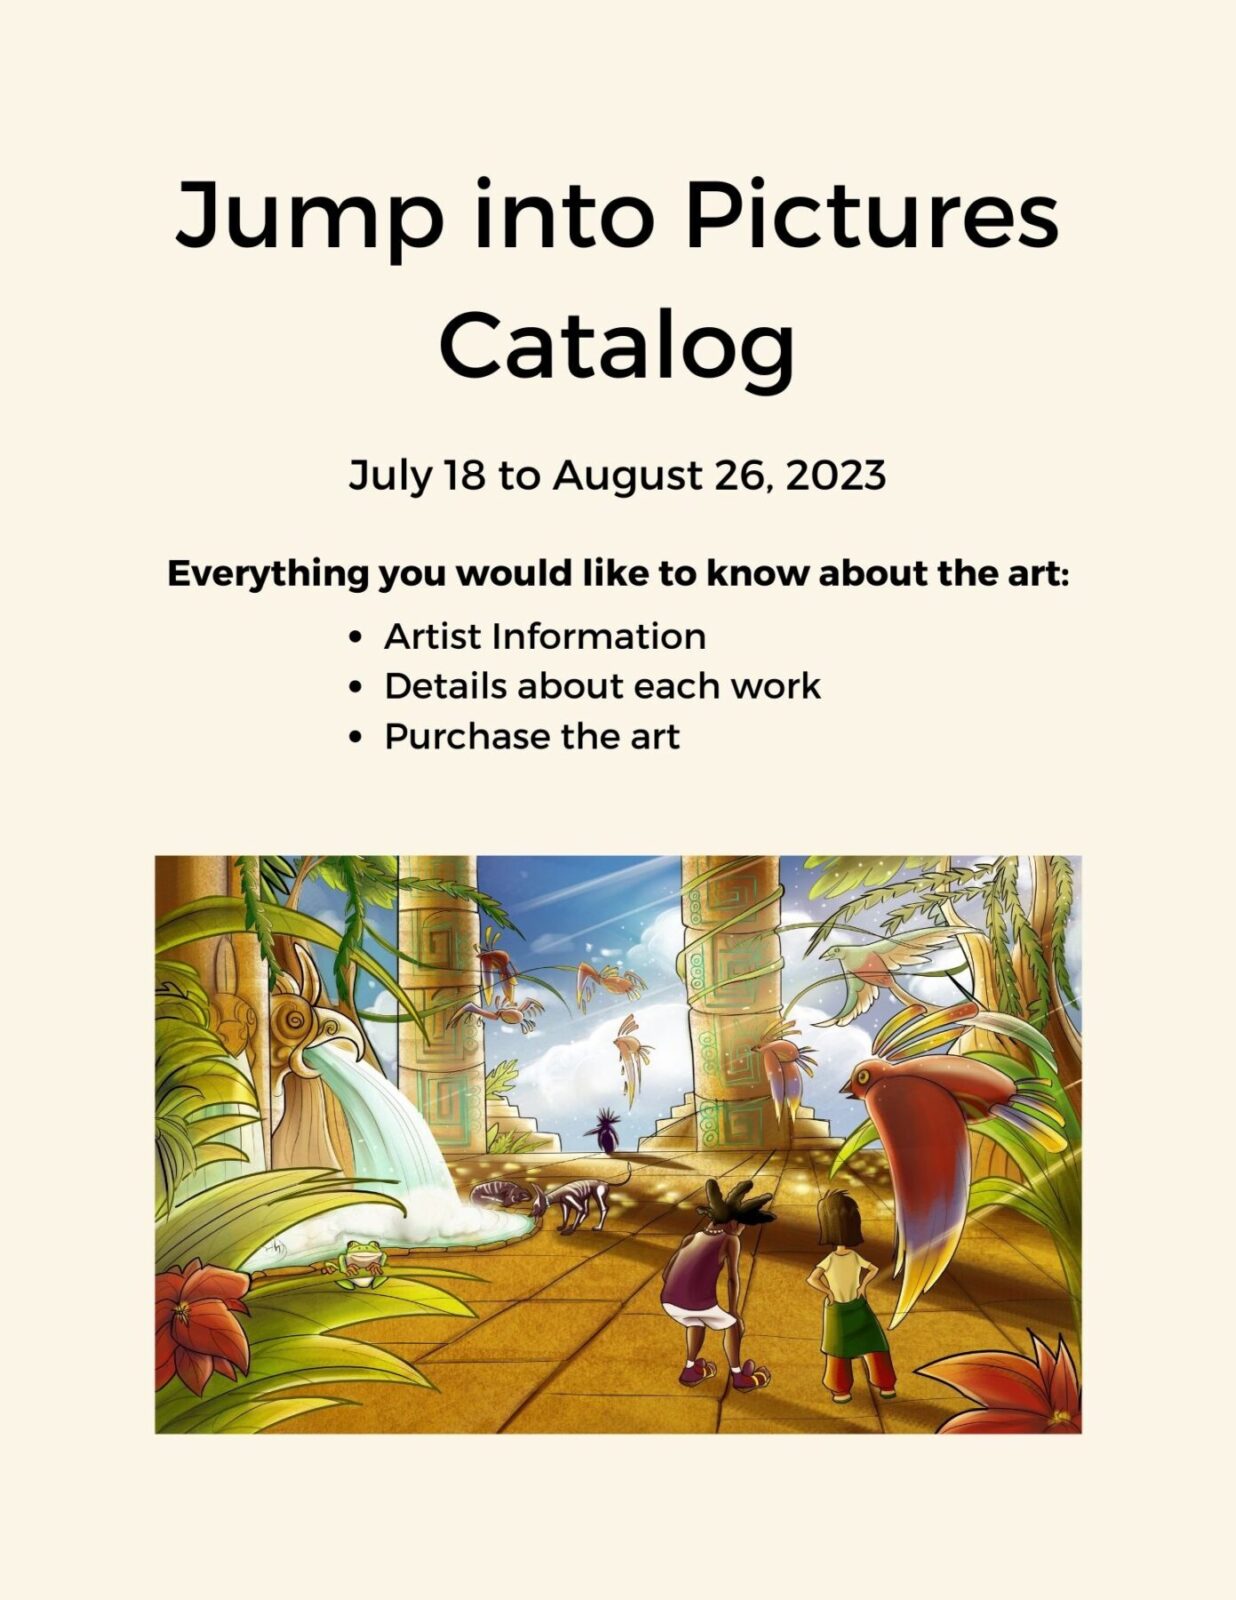 Jump into Pictures catalog 